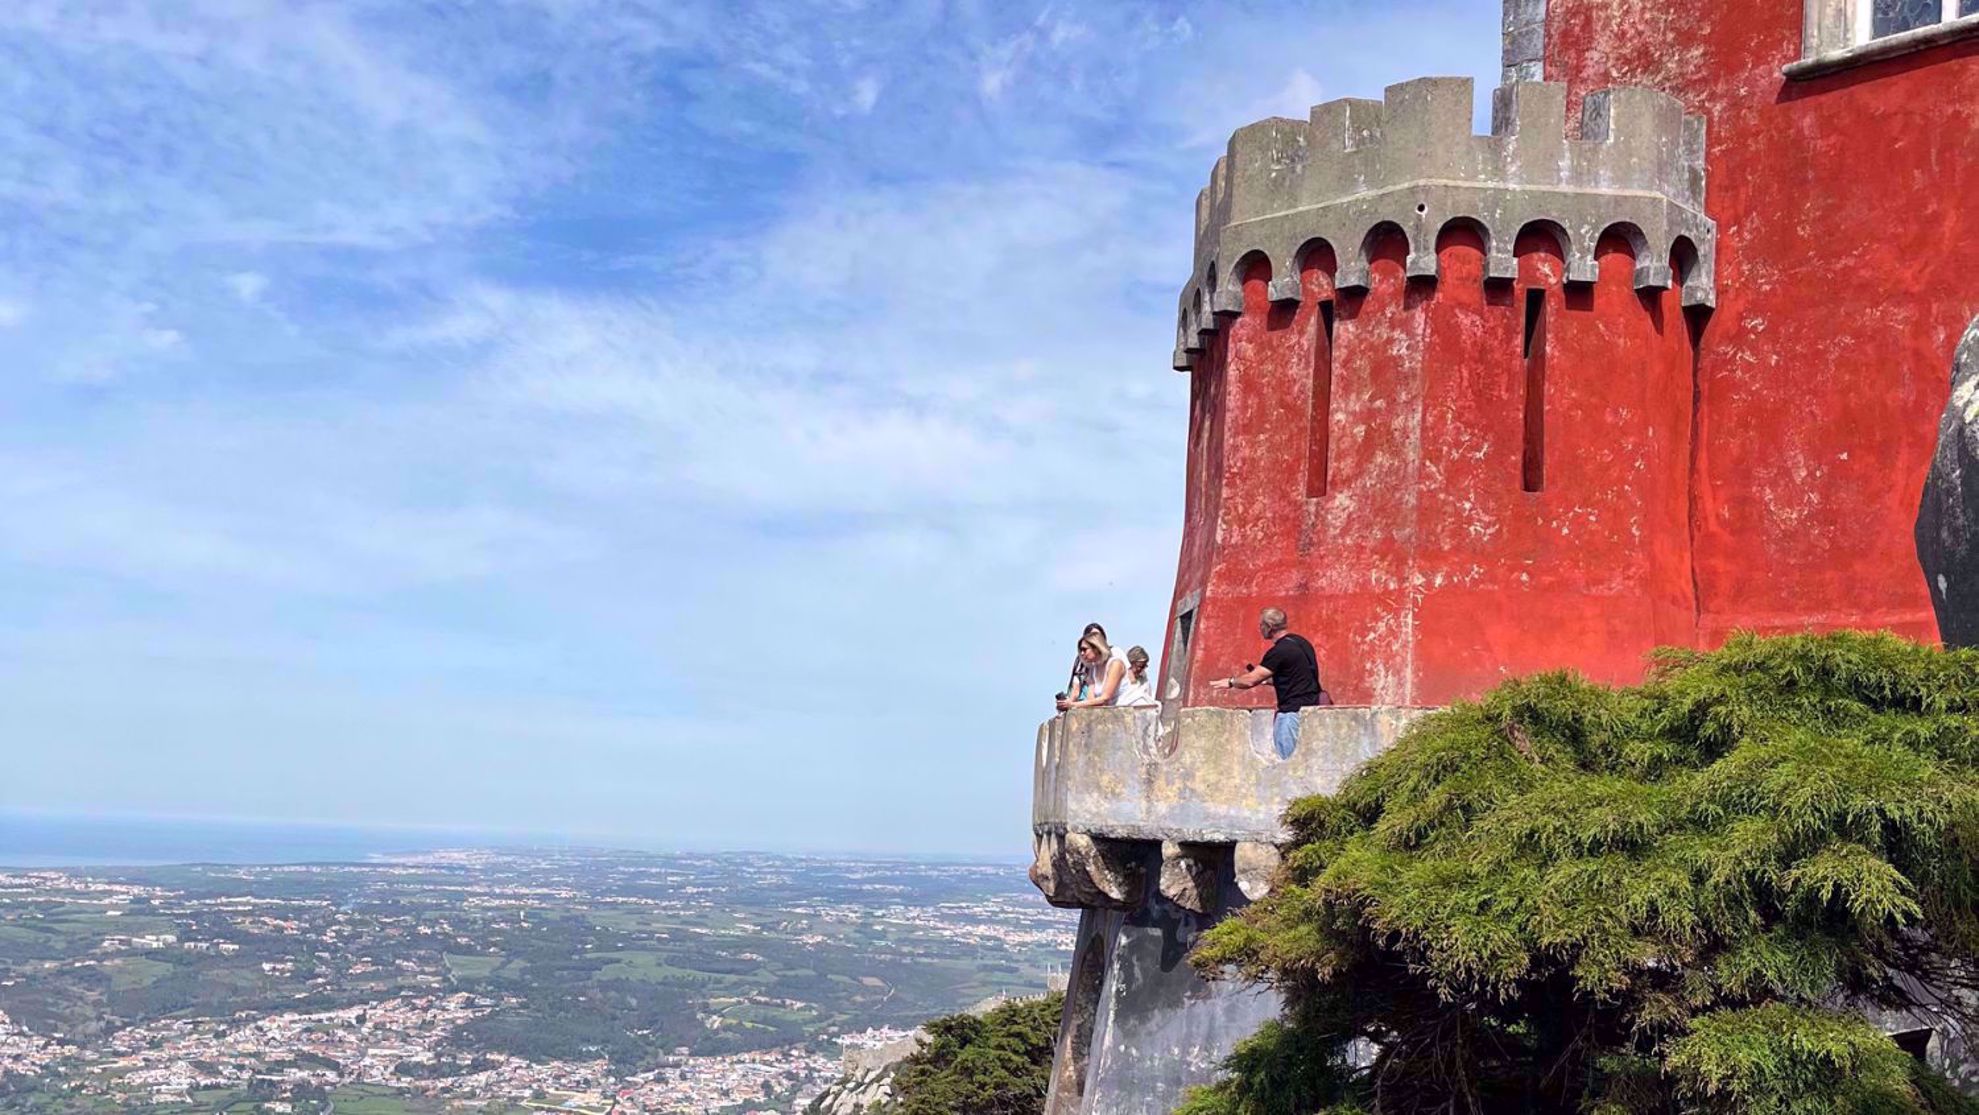 Pena Palace in Sintra Portugal Sightseeing